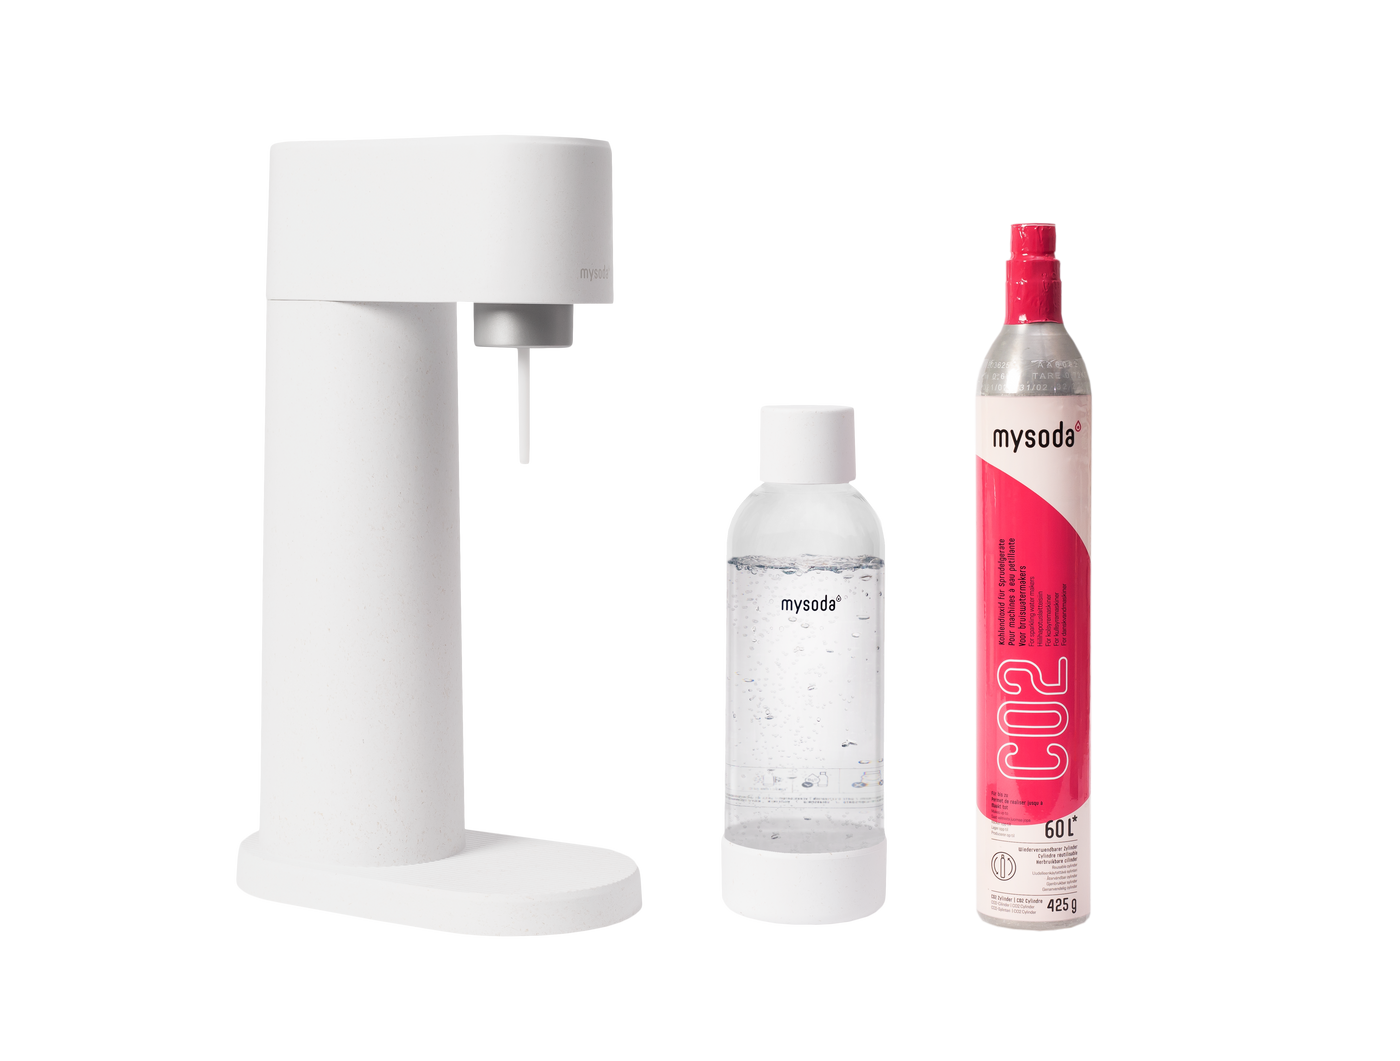 White Mysoda Woody sparkling water maker with bottle and co2 cylinder